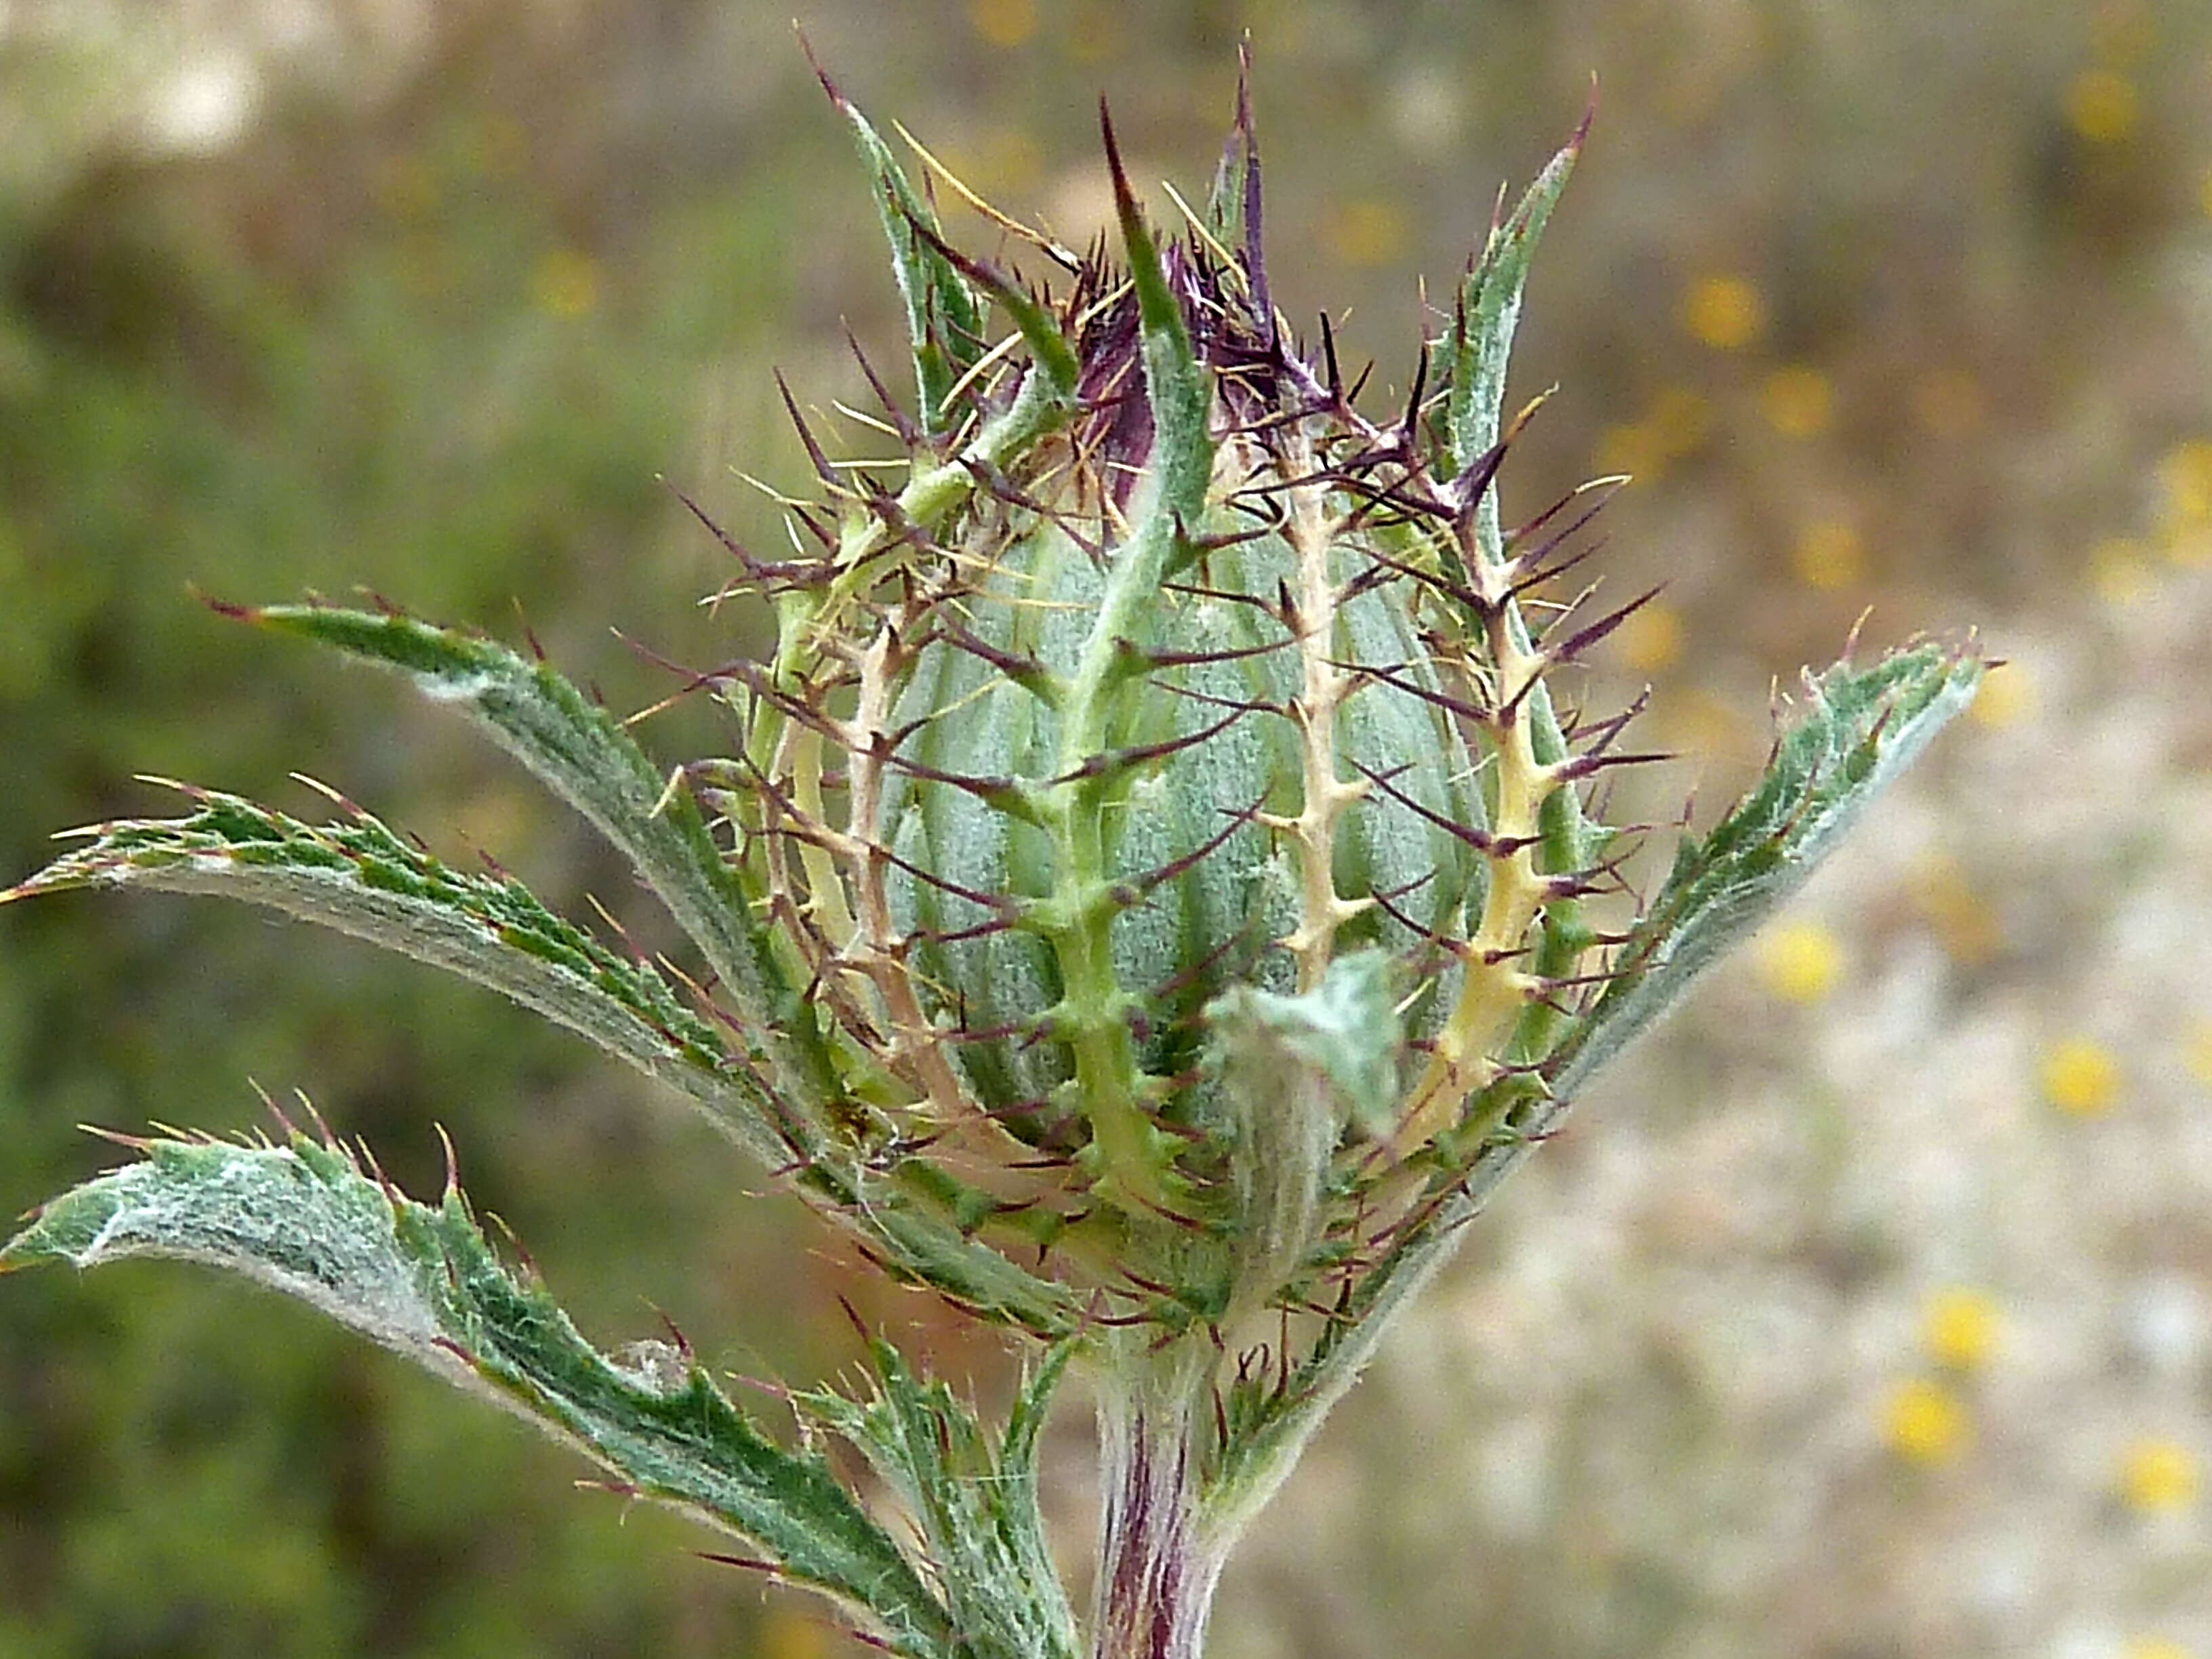 Image of Cage thistle